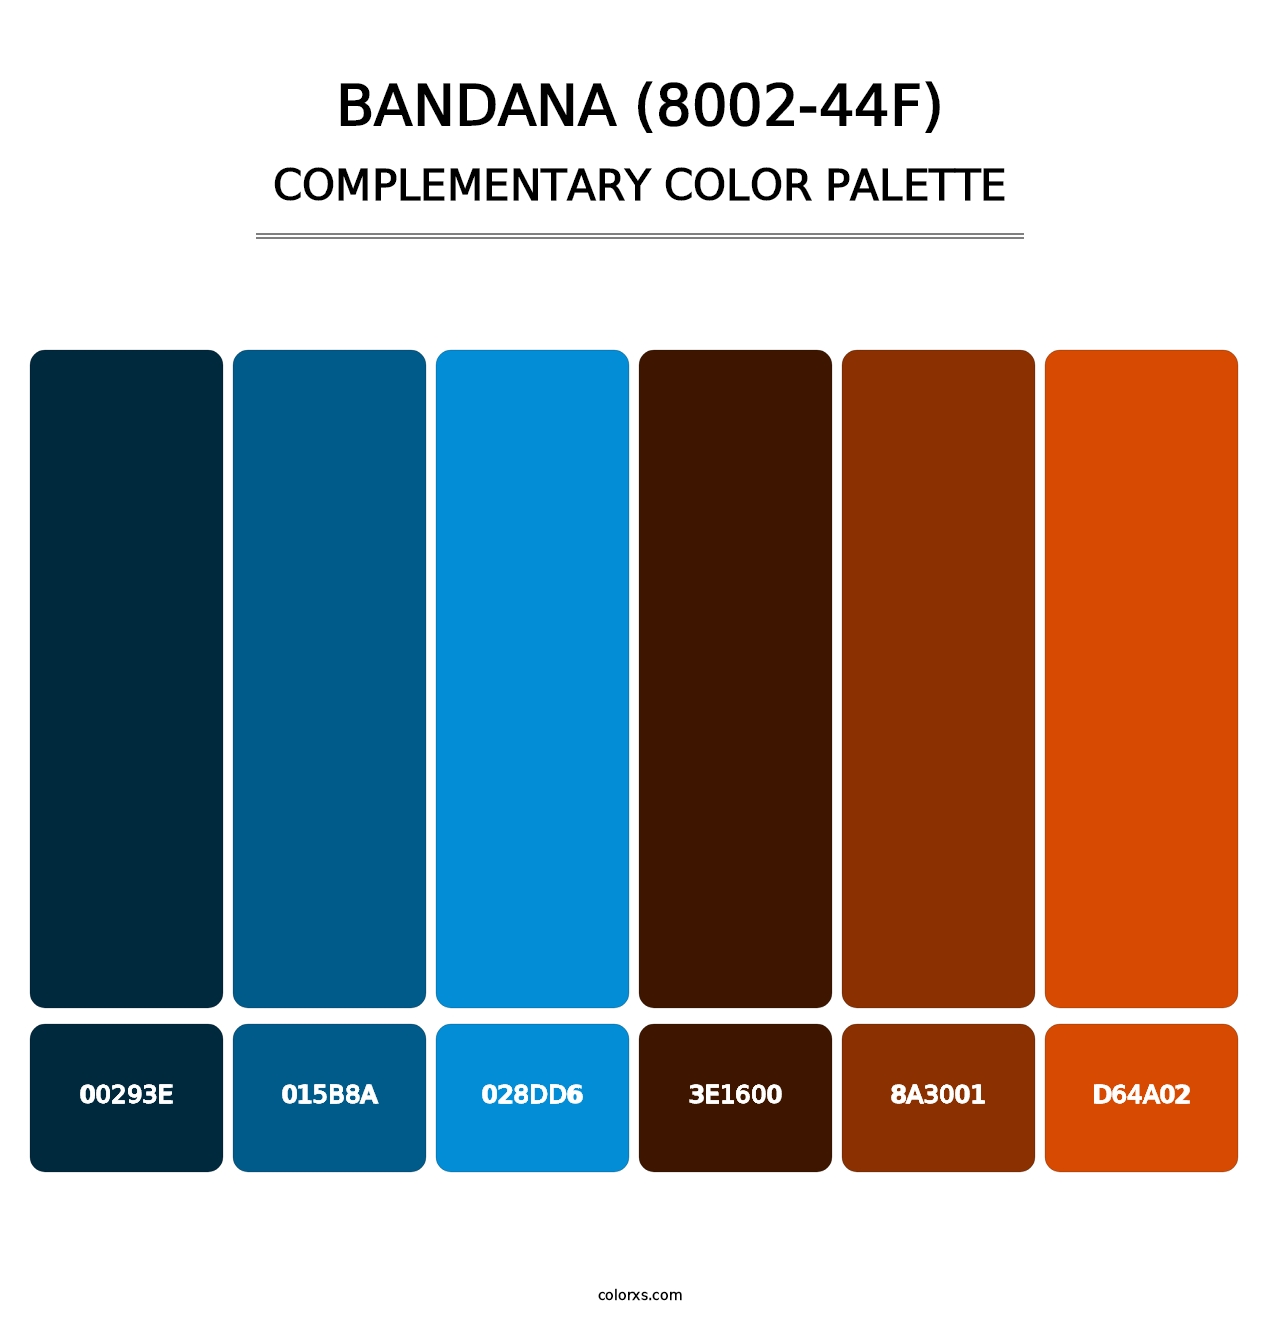 Bandana (8002-44F) - Complementary Color Palette